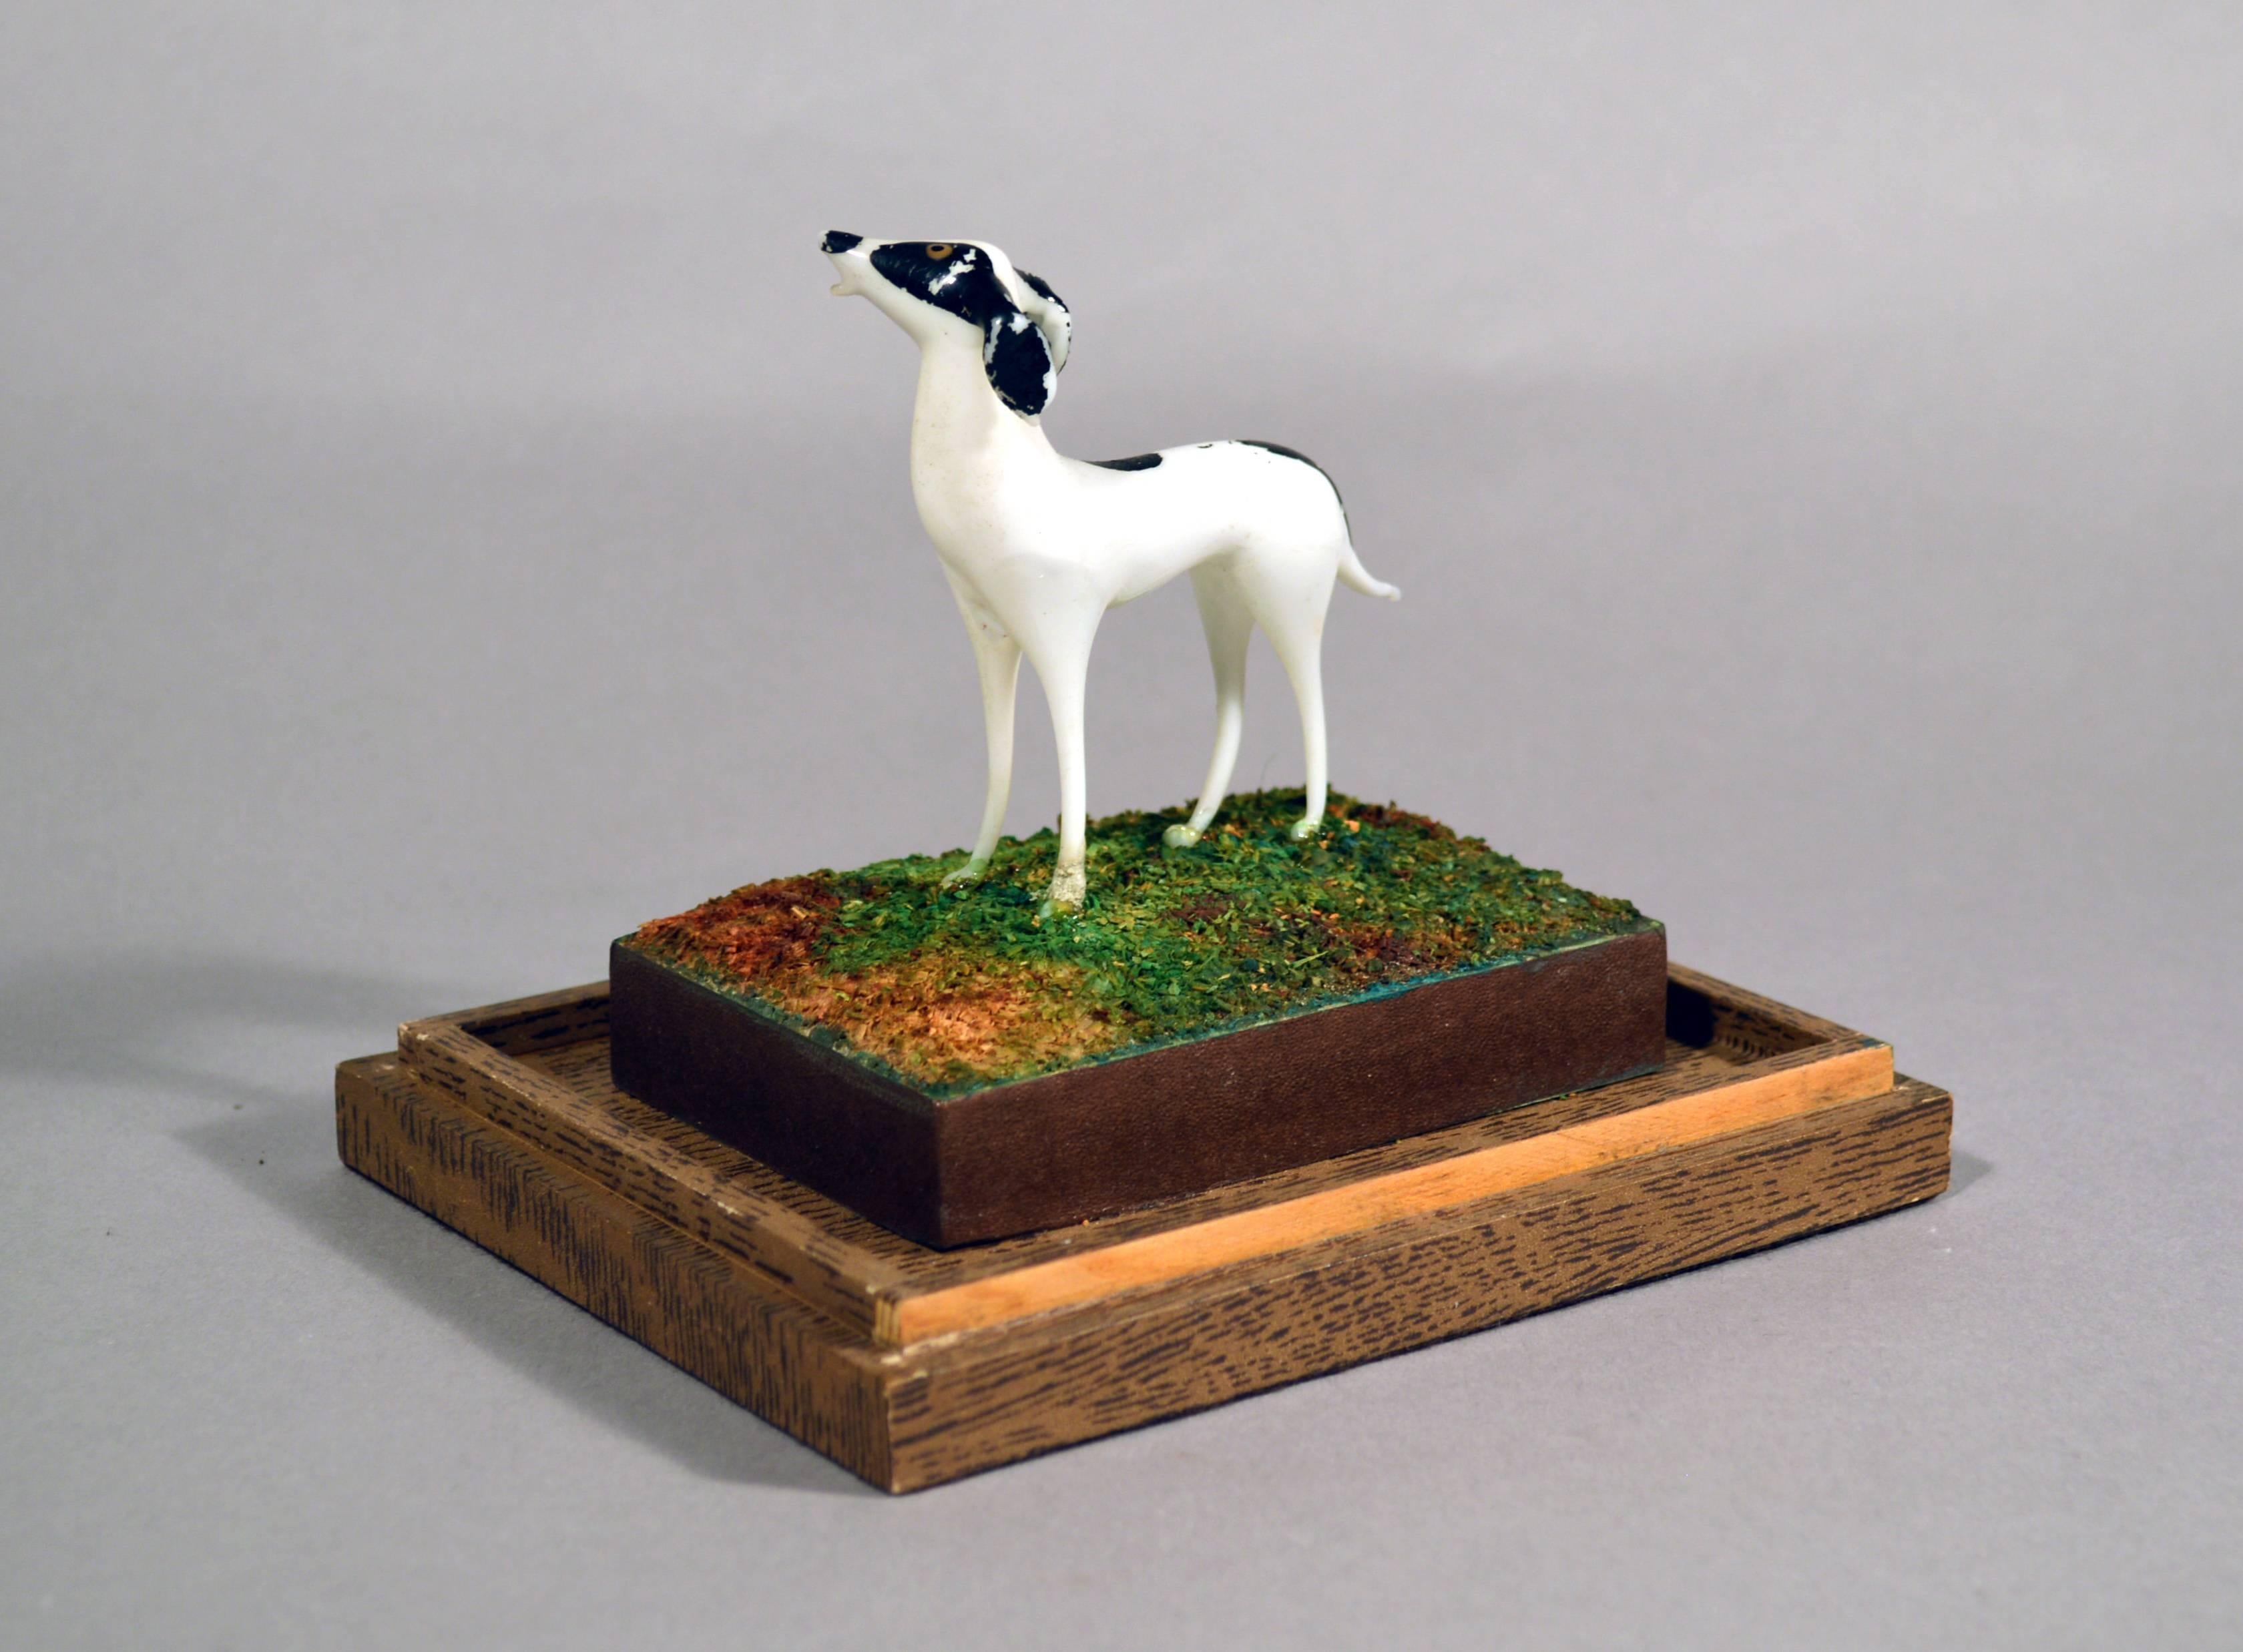 The vintage Lauscha glass shadow box with glass dog was made in Germany in the 1930s.

The white glass dog with black painted spots is depicted in a landscape created by a papered ground and backdrop standing on a raised mould depicting grass